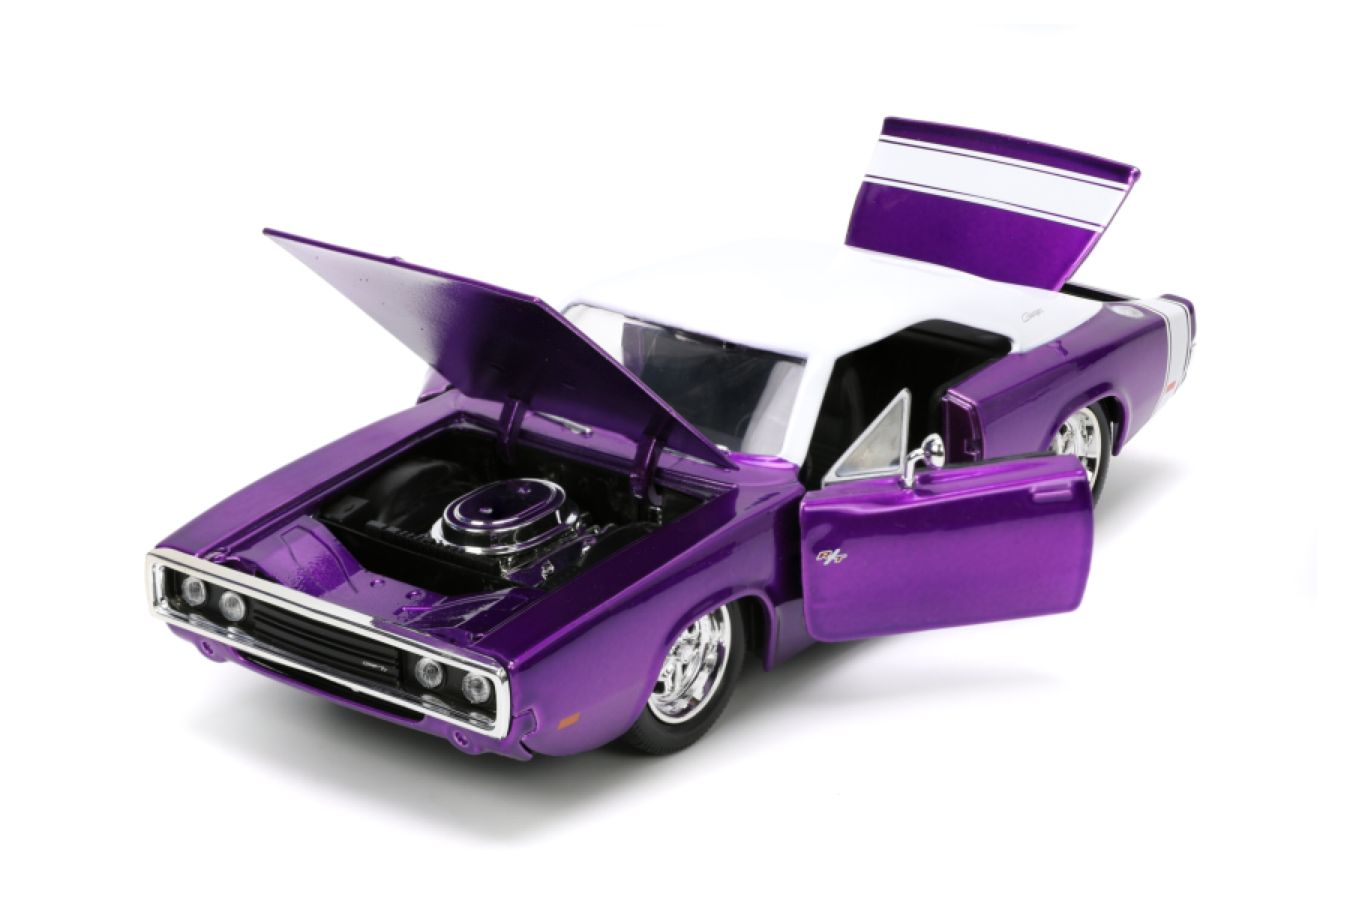 Big Time Muscle - 1970 Dodge Charger R/T 1:24 Scale